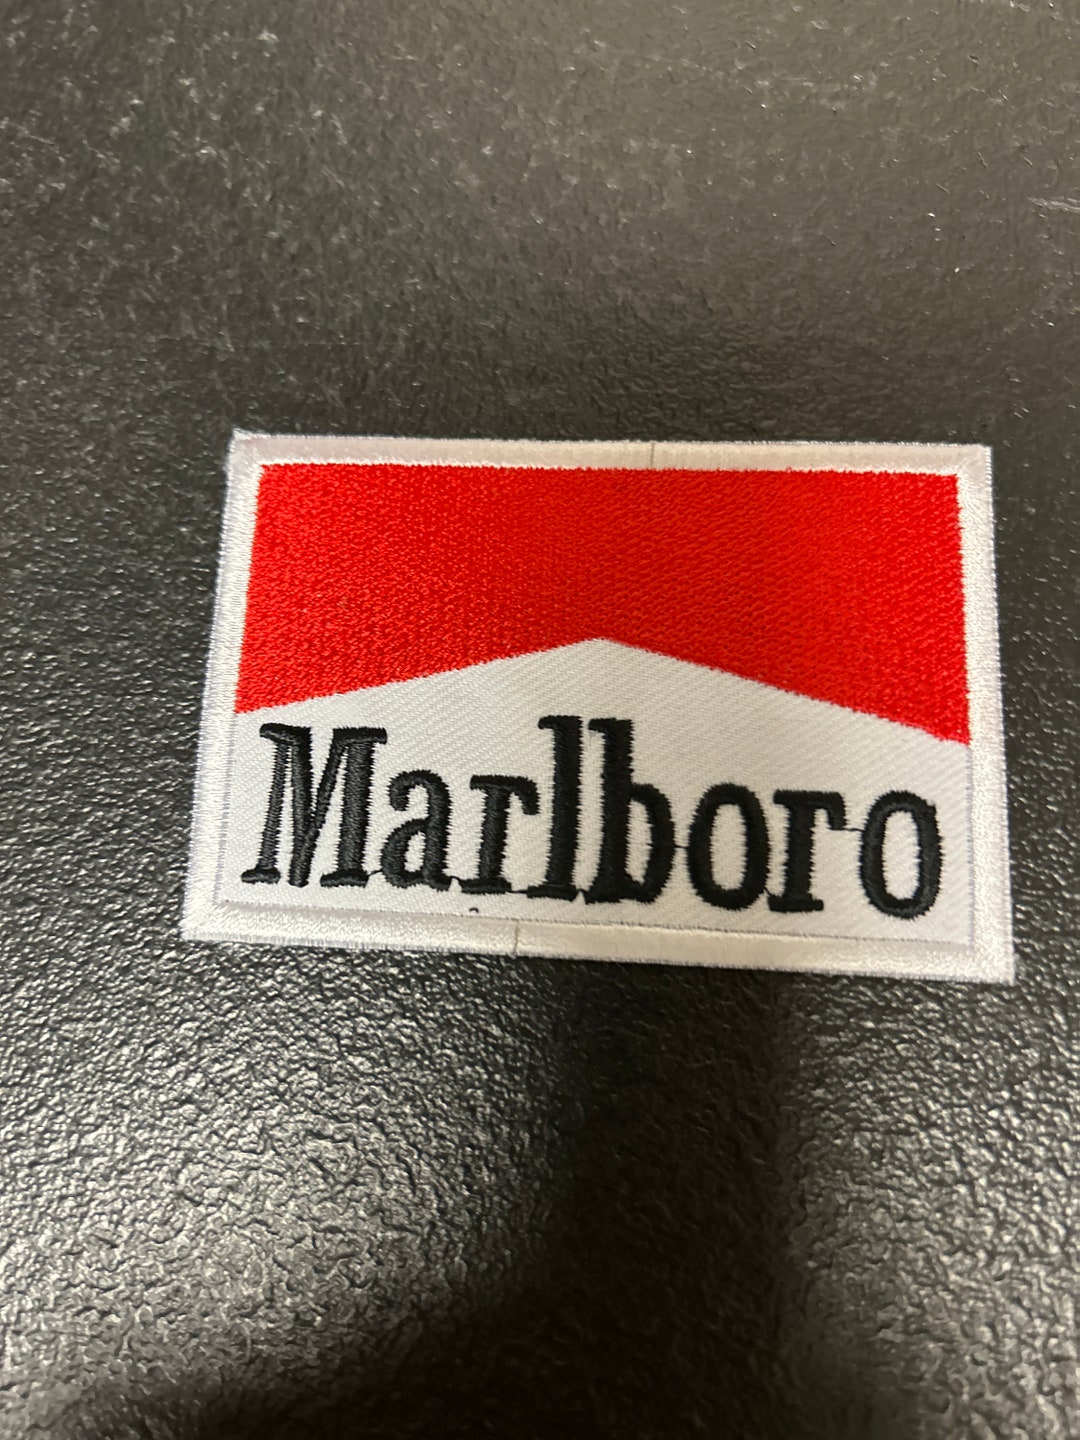 Marlboro Reds Embroidered Patch - Etsy